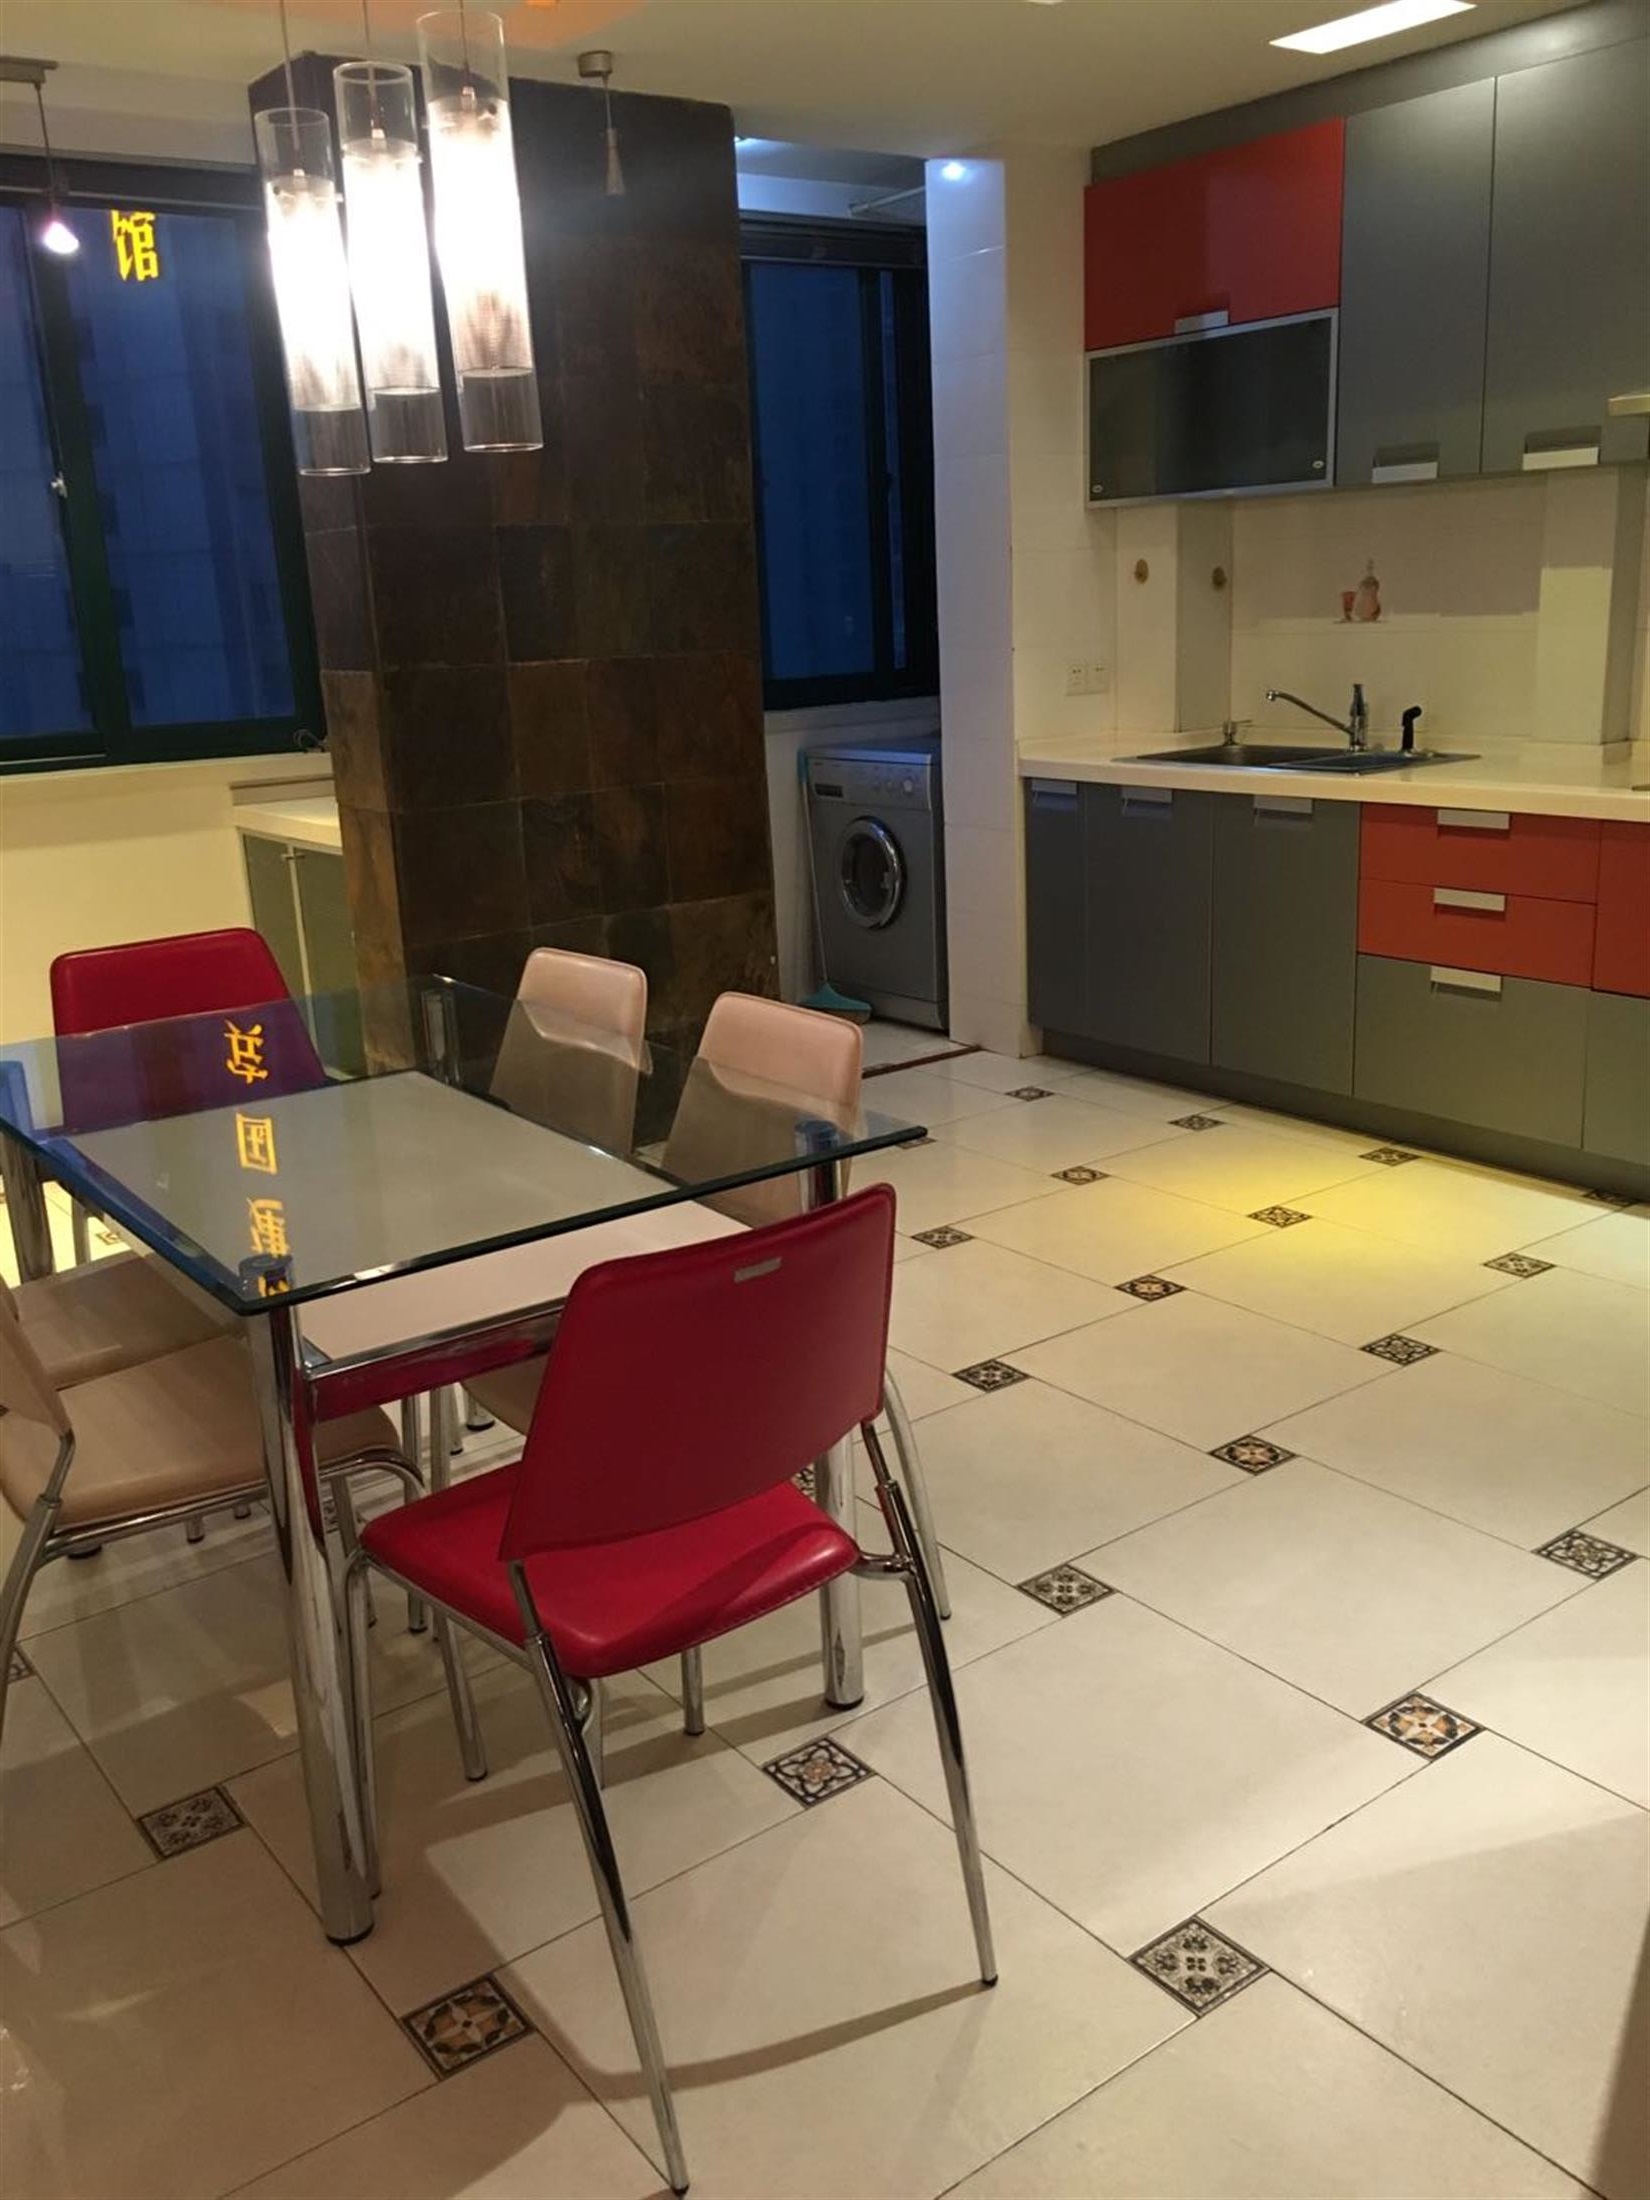 Dining Table Large Apt for Rent at Great Price in Xujiahui, Shanghai